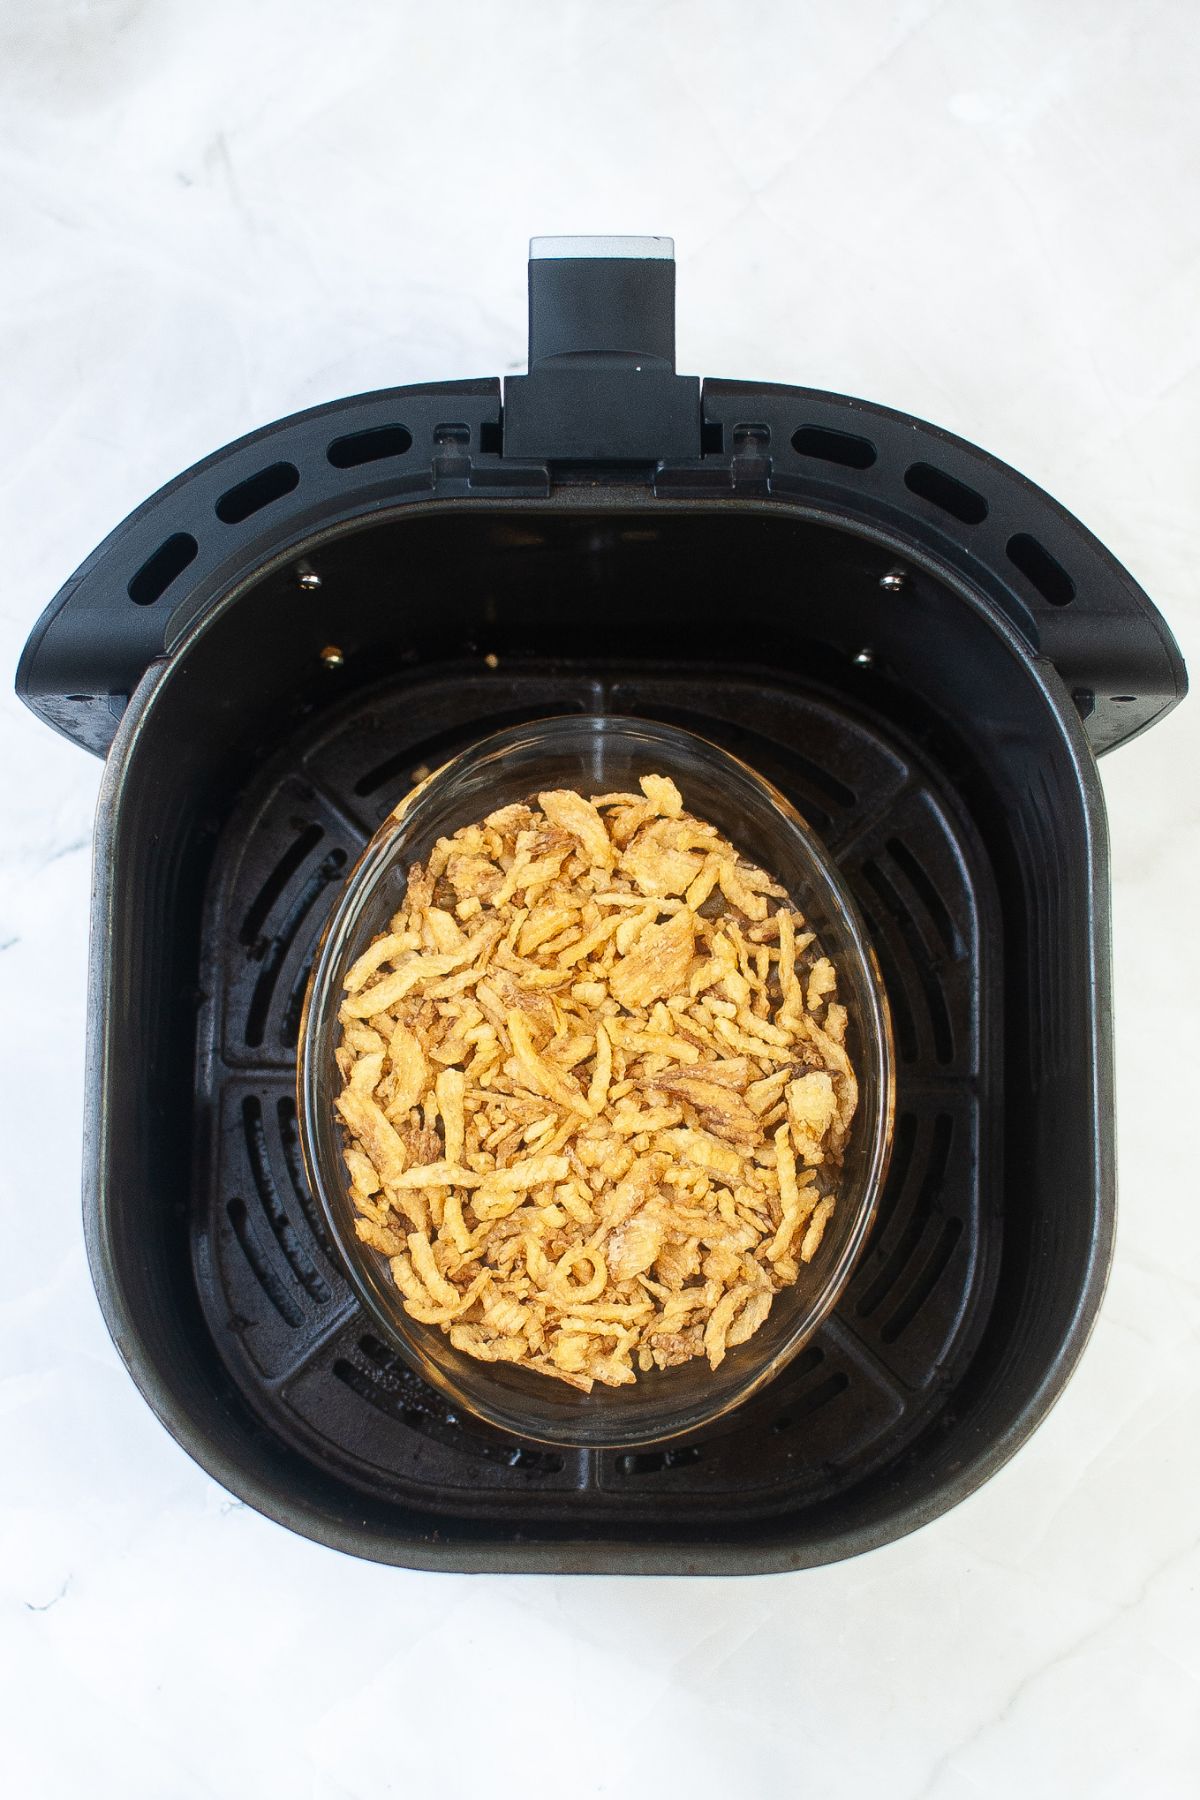 glass dish filled with food inside the air fryer basket